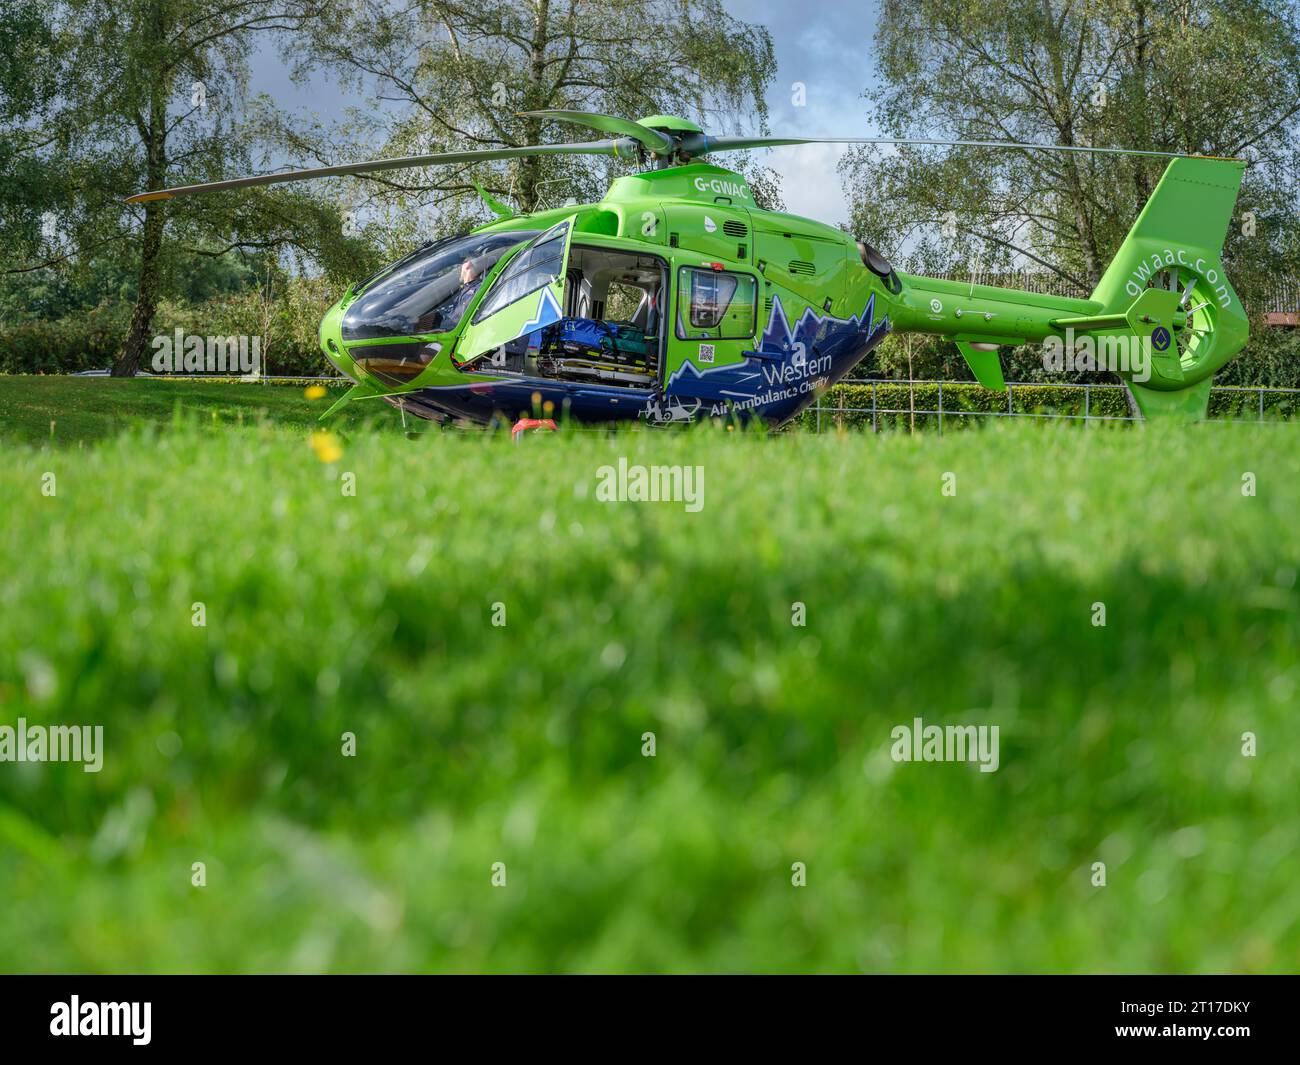 The Great Western Air Ambulance prepares for take off from outside Gloucester Royal Hospital. The bright lime green and blue helicopter, call sign Hel Stock Photo